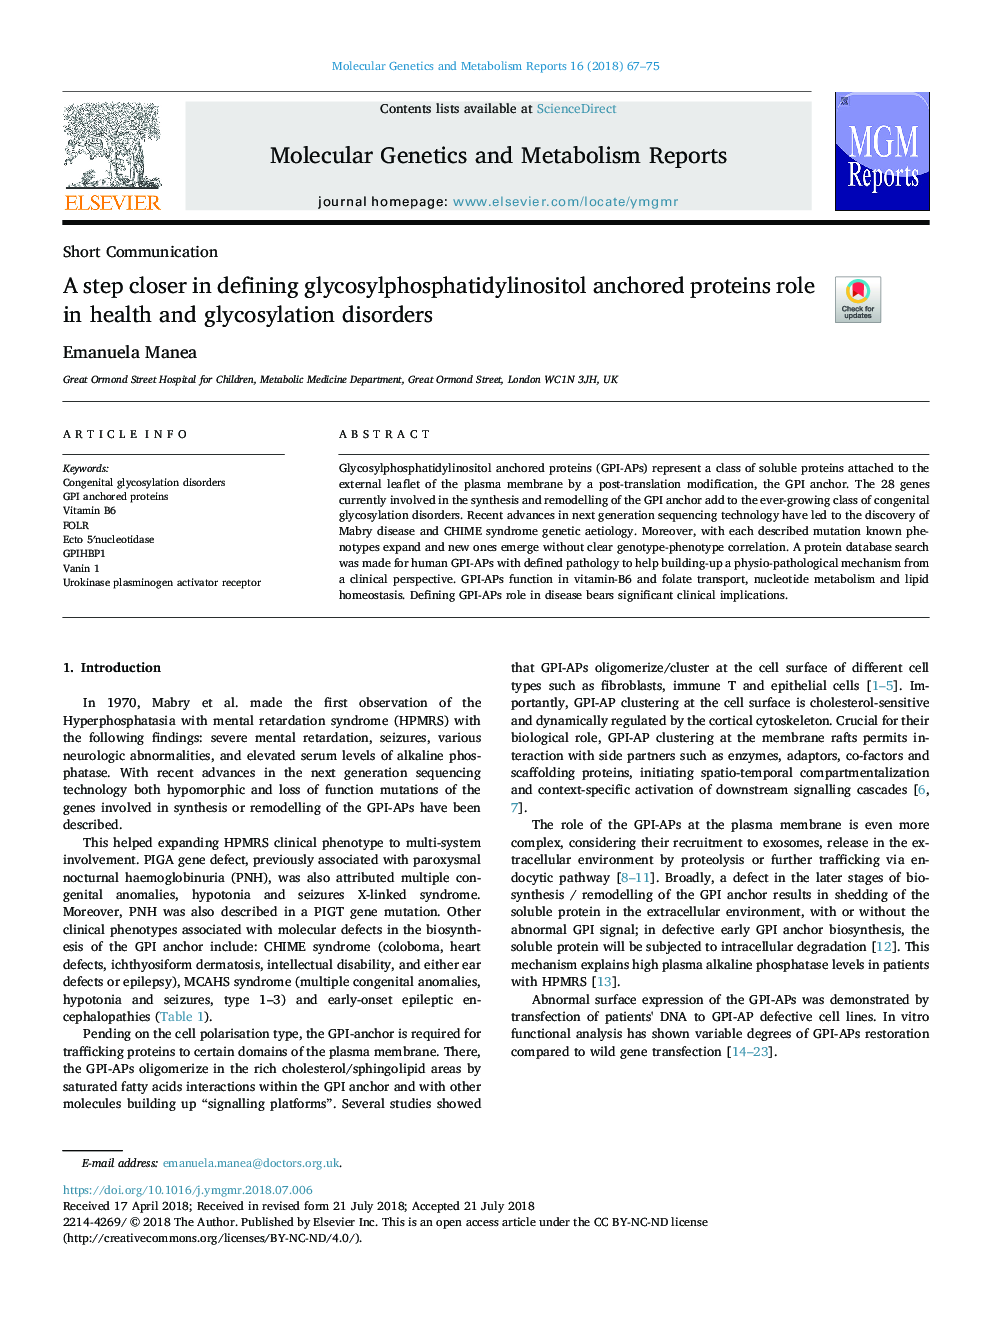 A step closer in defining glycosylphosphatidylinositol anchored proteins role in health and glycosylation disorders